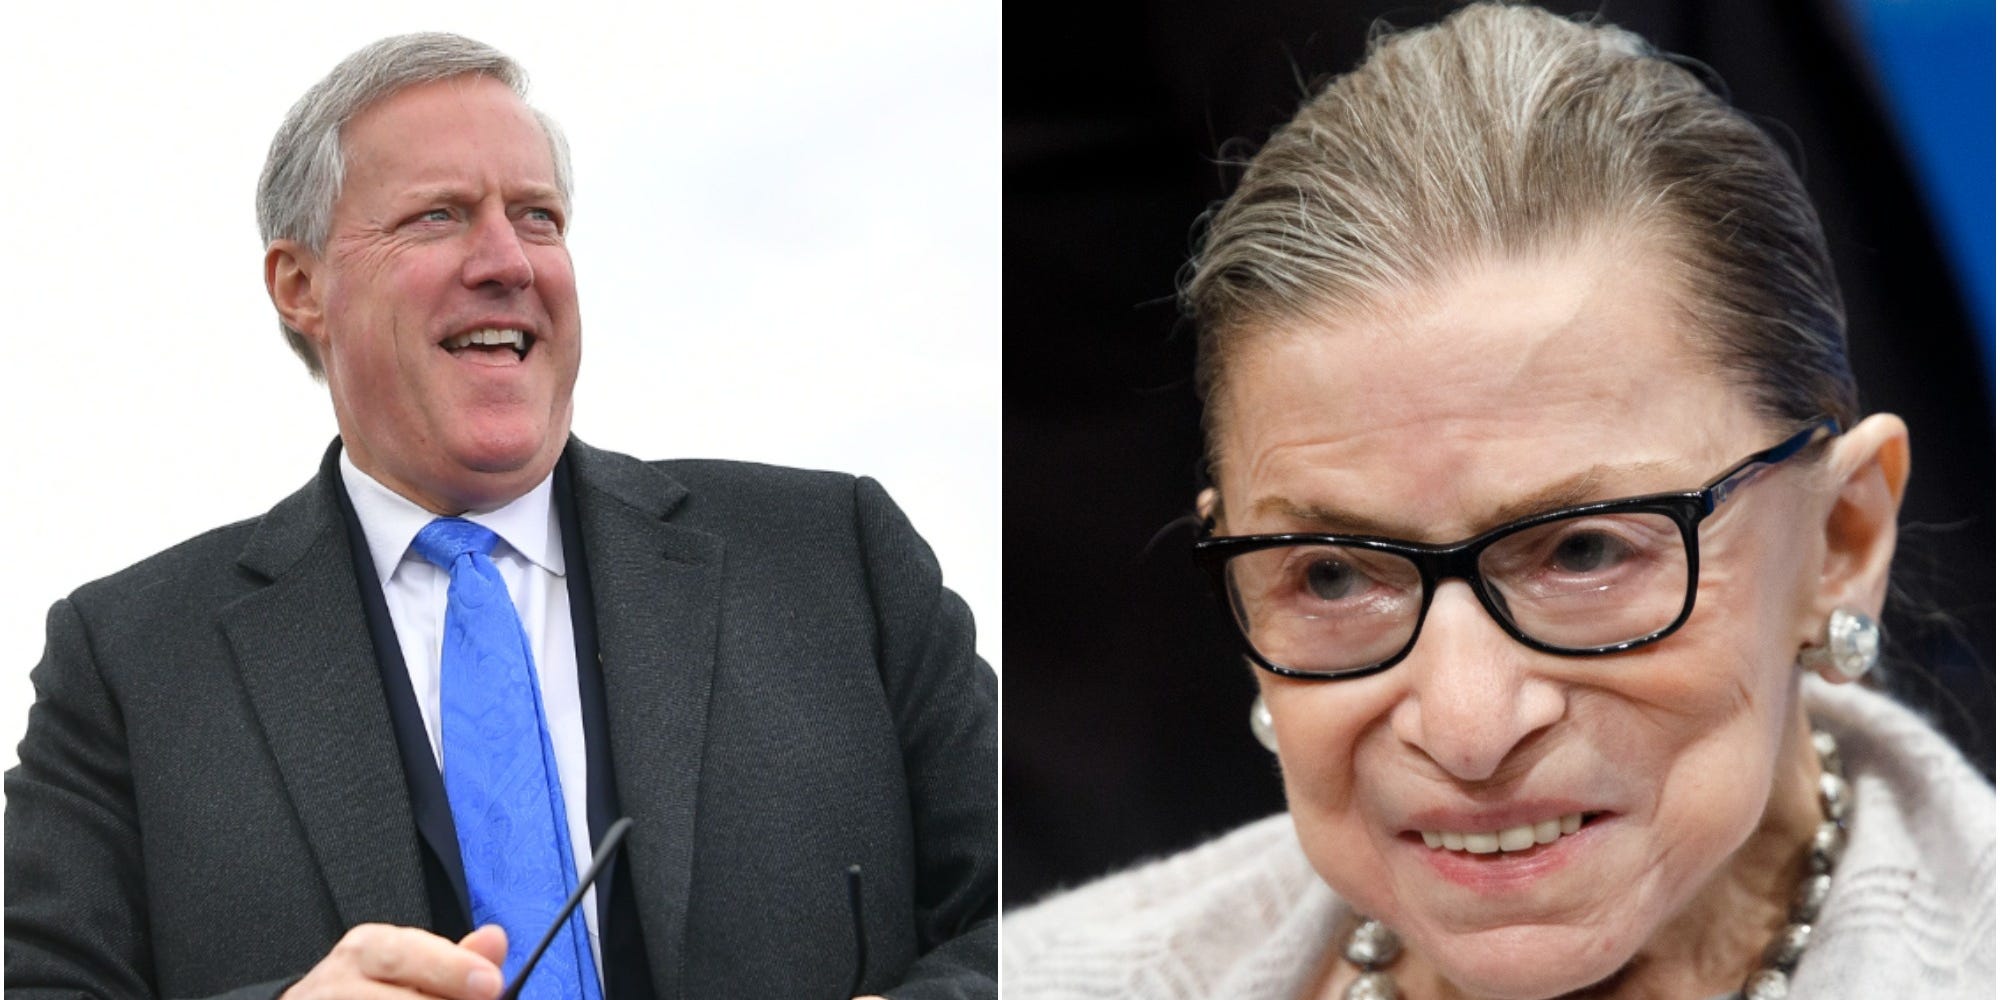 Former White House Chief of Staff Mark Meadows and the late Supreme Court Justice Ruth Bader Ginsburg.